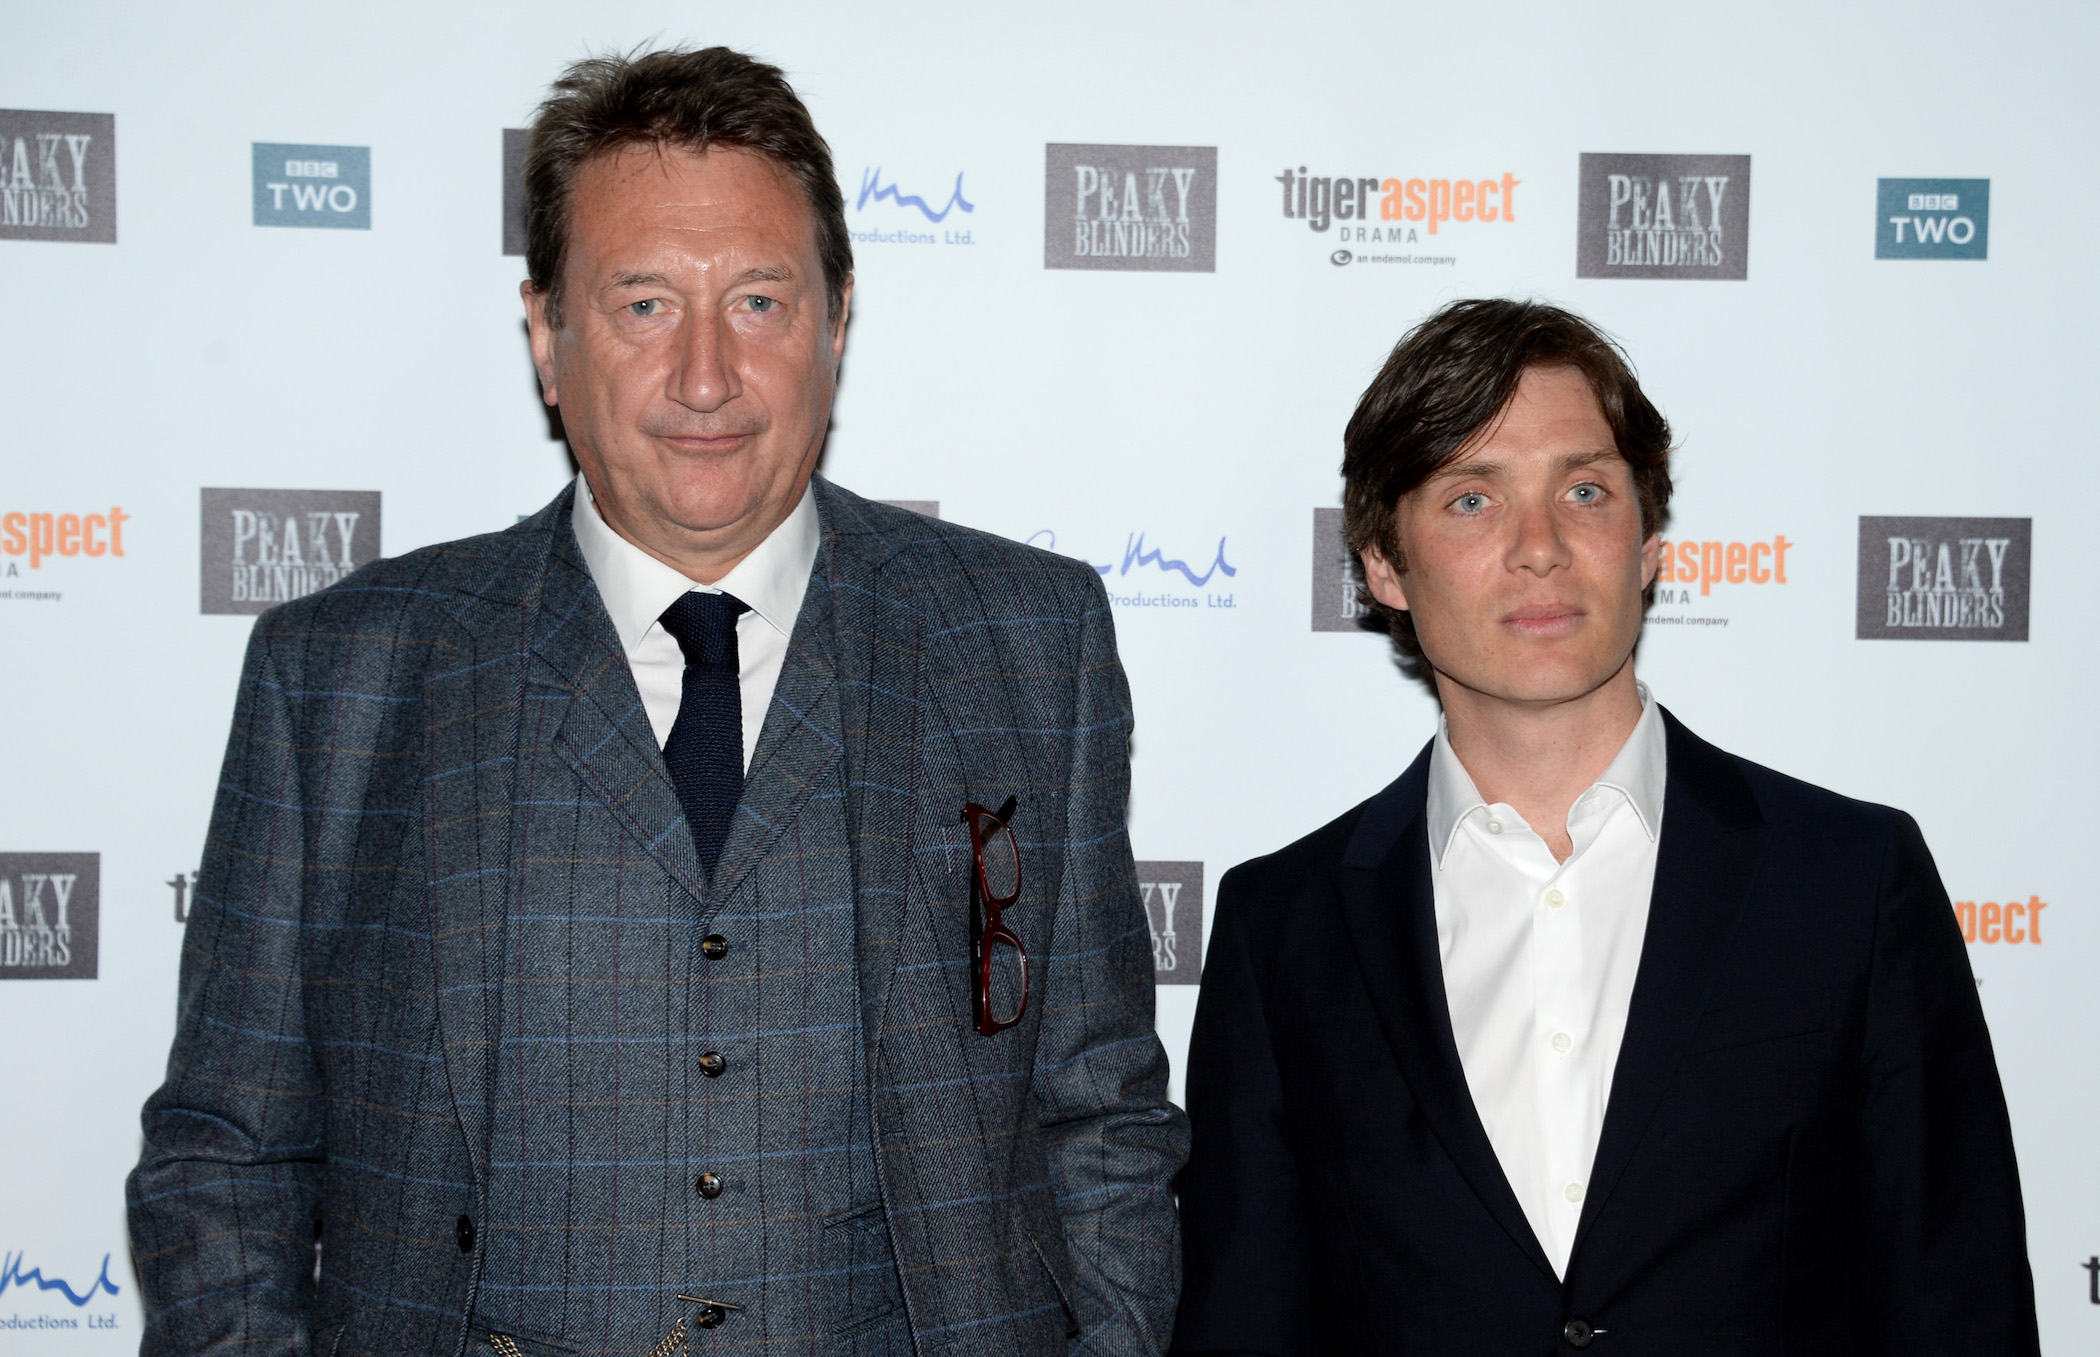 'Peaky Blinders' Season 6 creator Steven Knight and Cillian Murphy standing together at an event